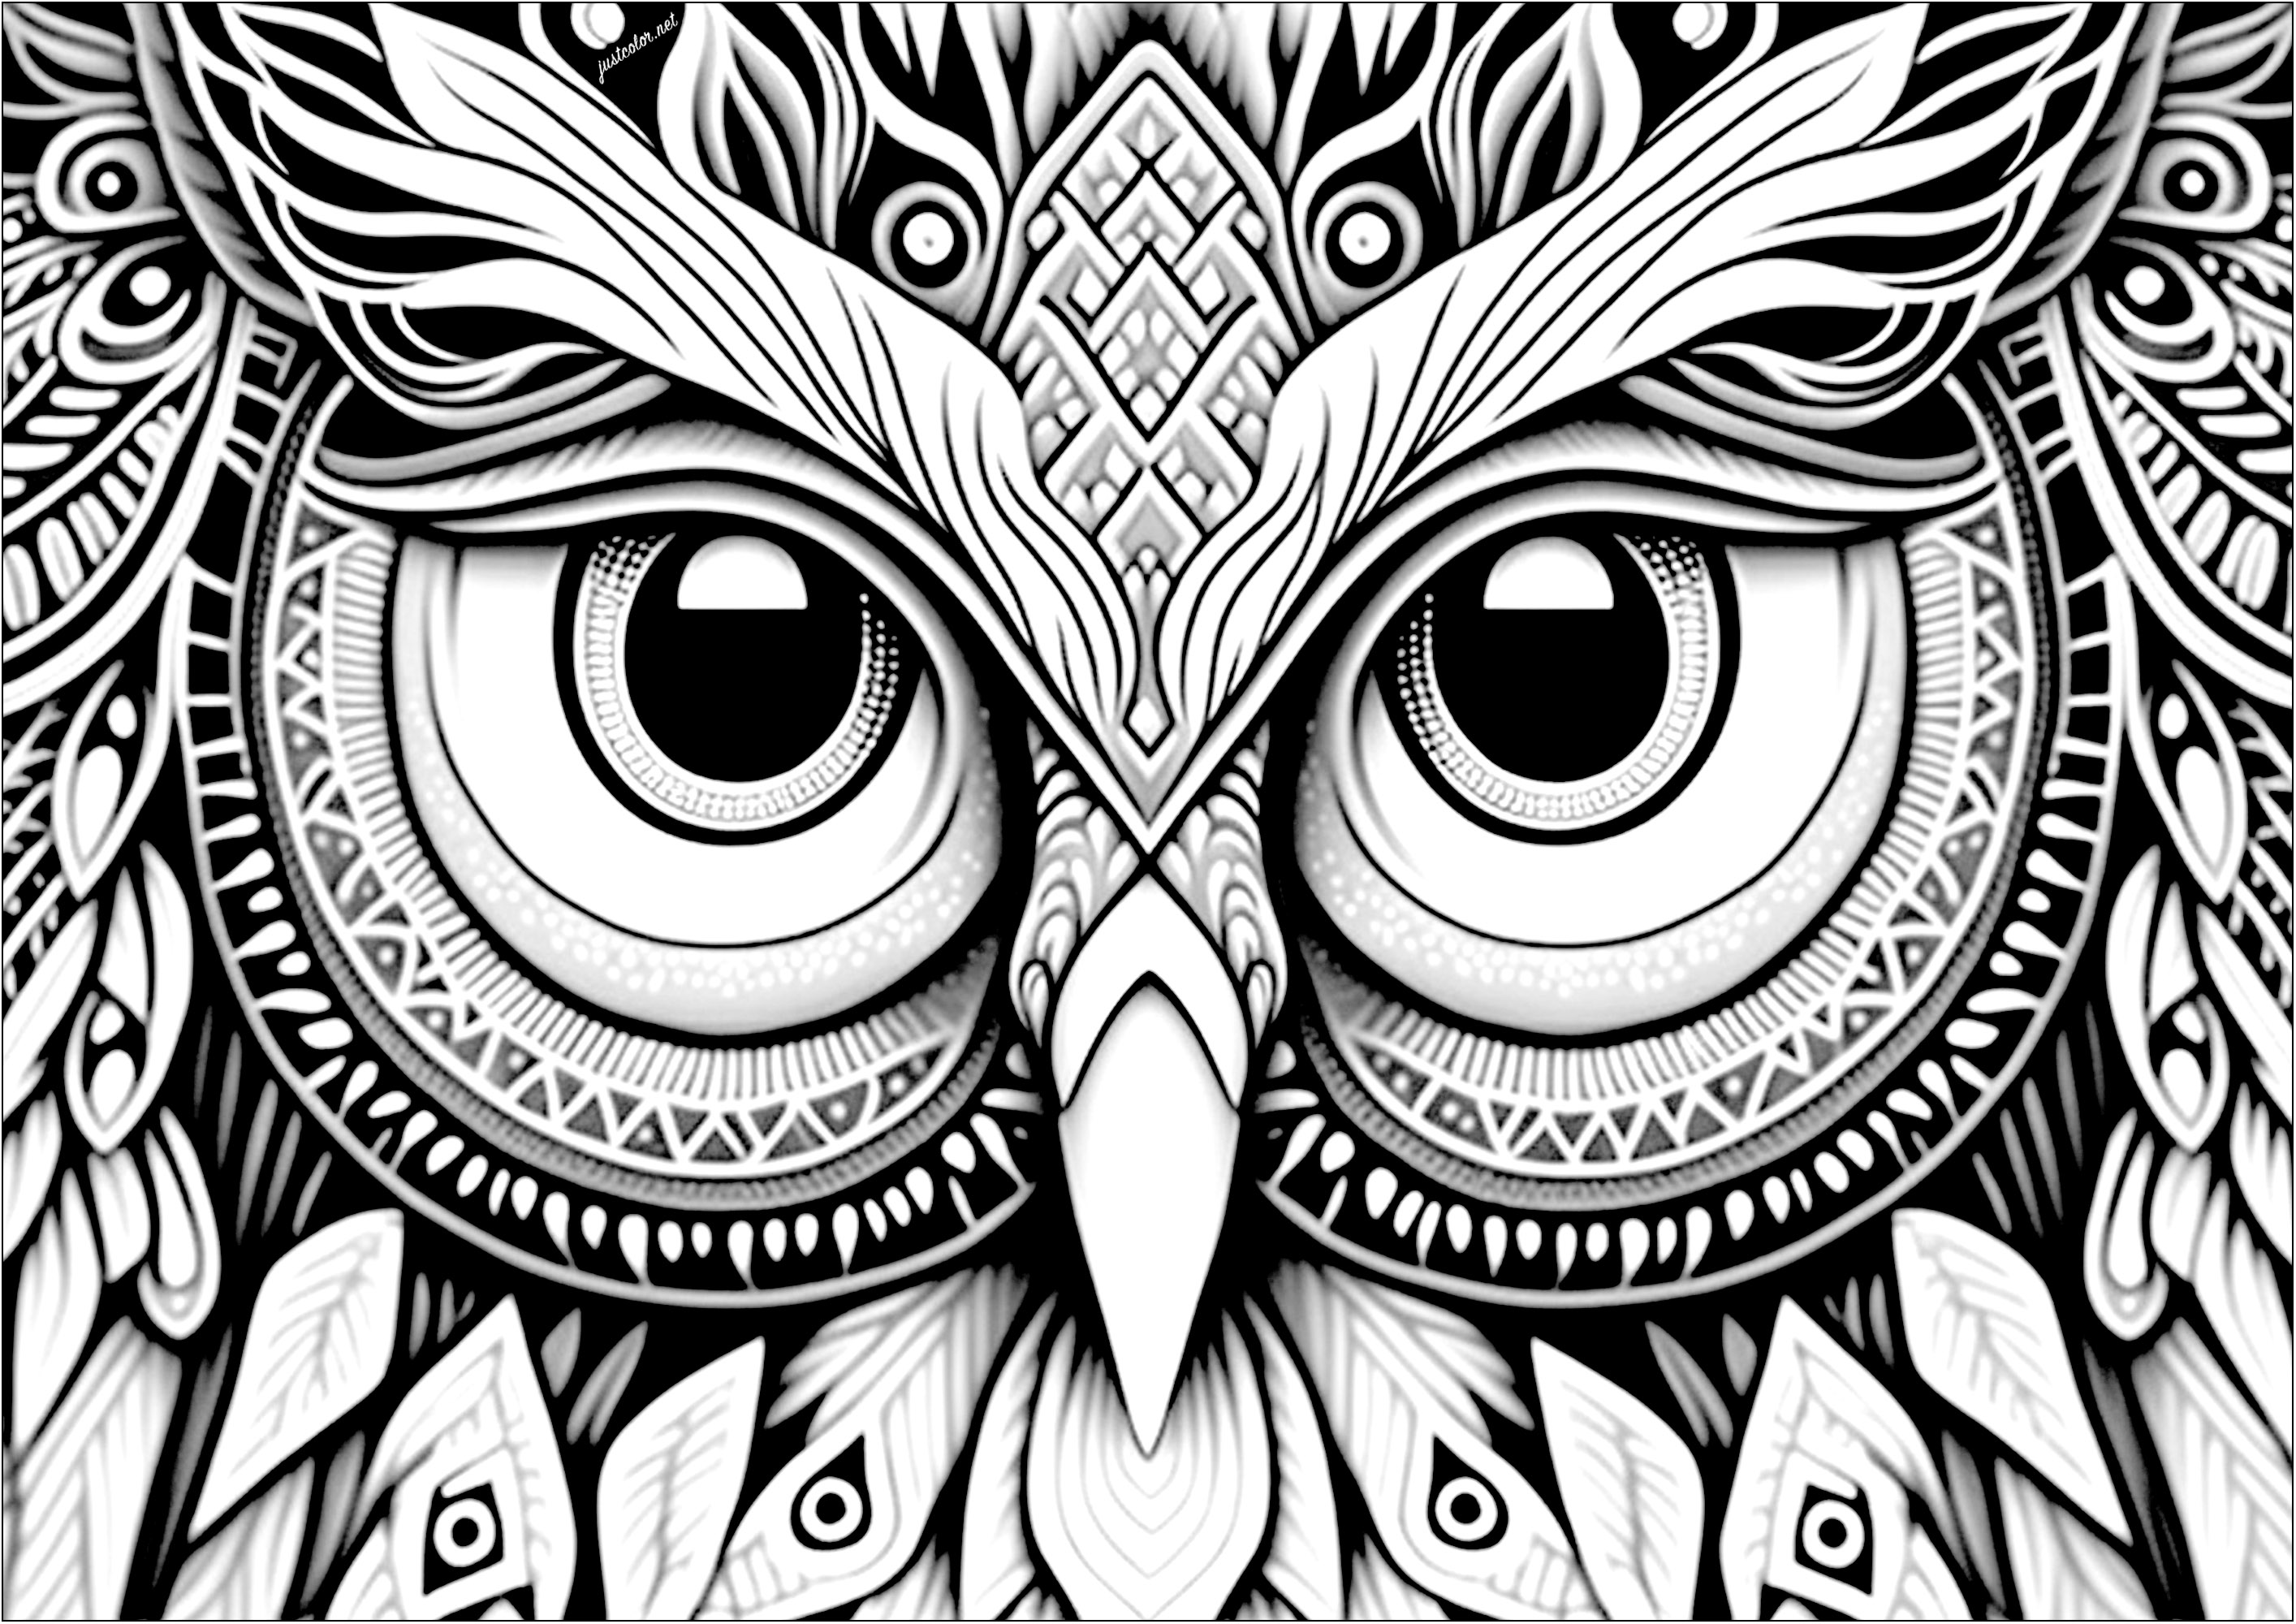 A beautiful owl with nice feathers to color. This cute coloring page represents the head of an owl to color. The owl is very expressive and the details of its feathers are both realistic and abstract.